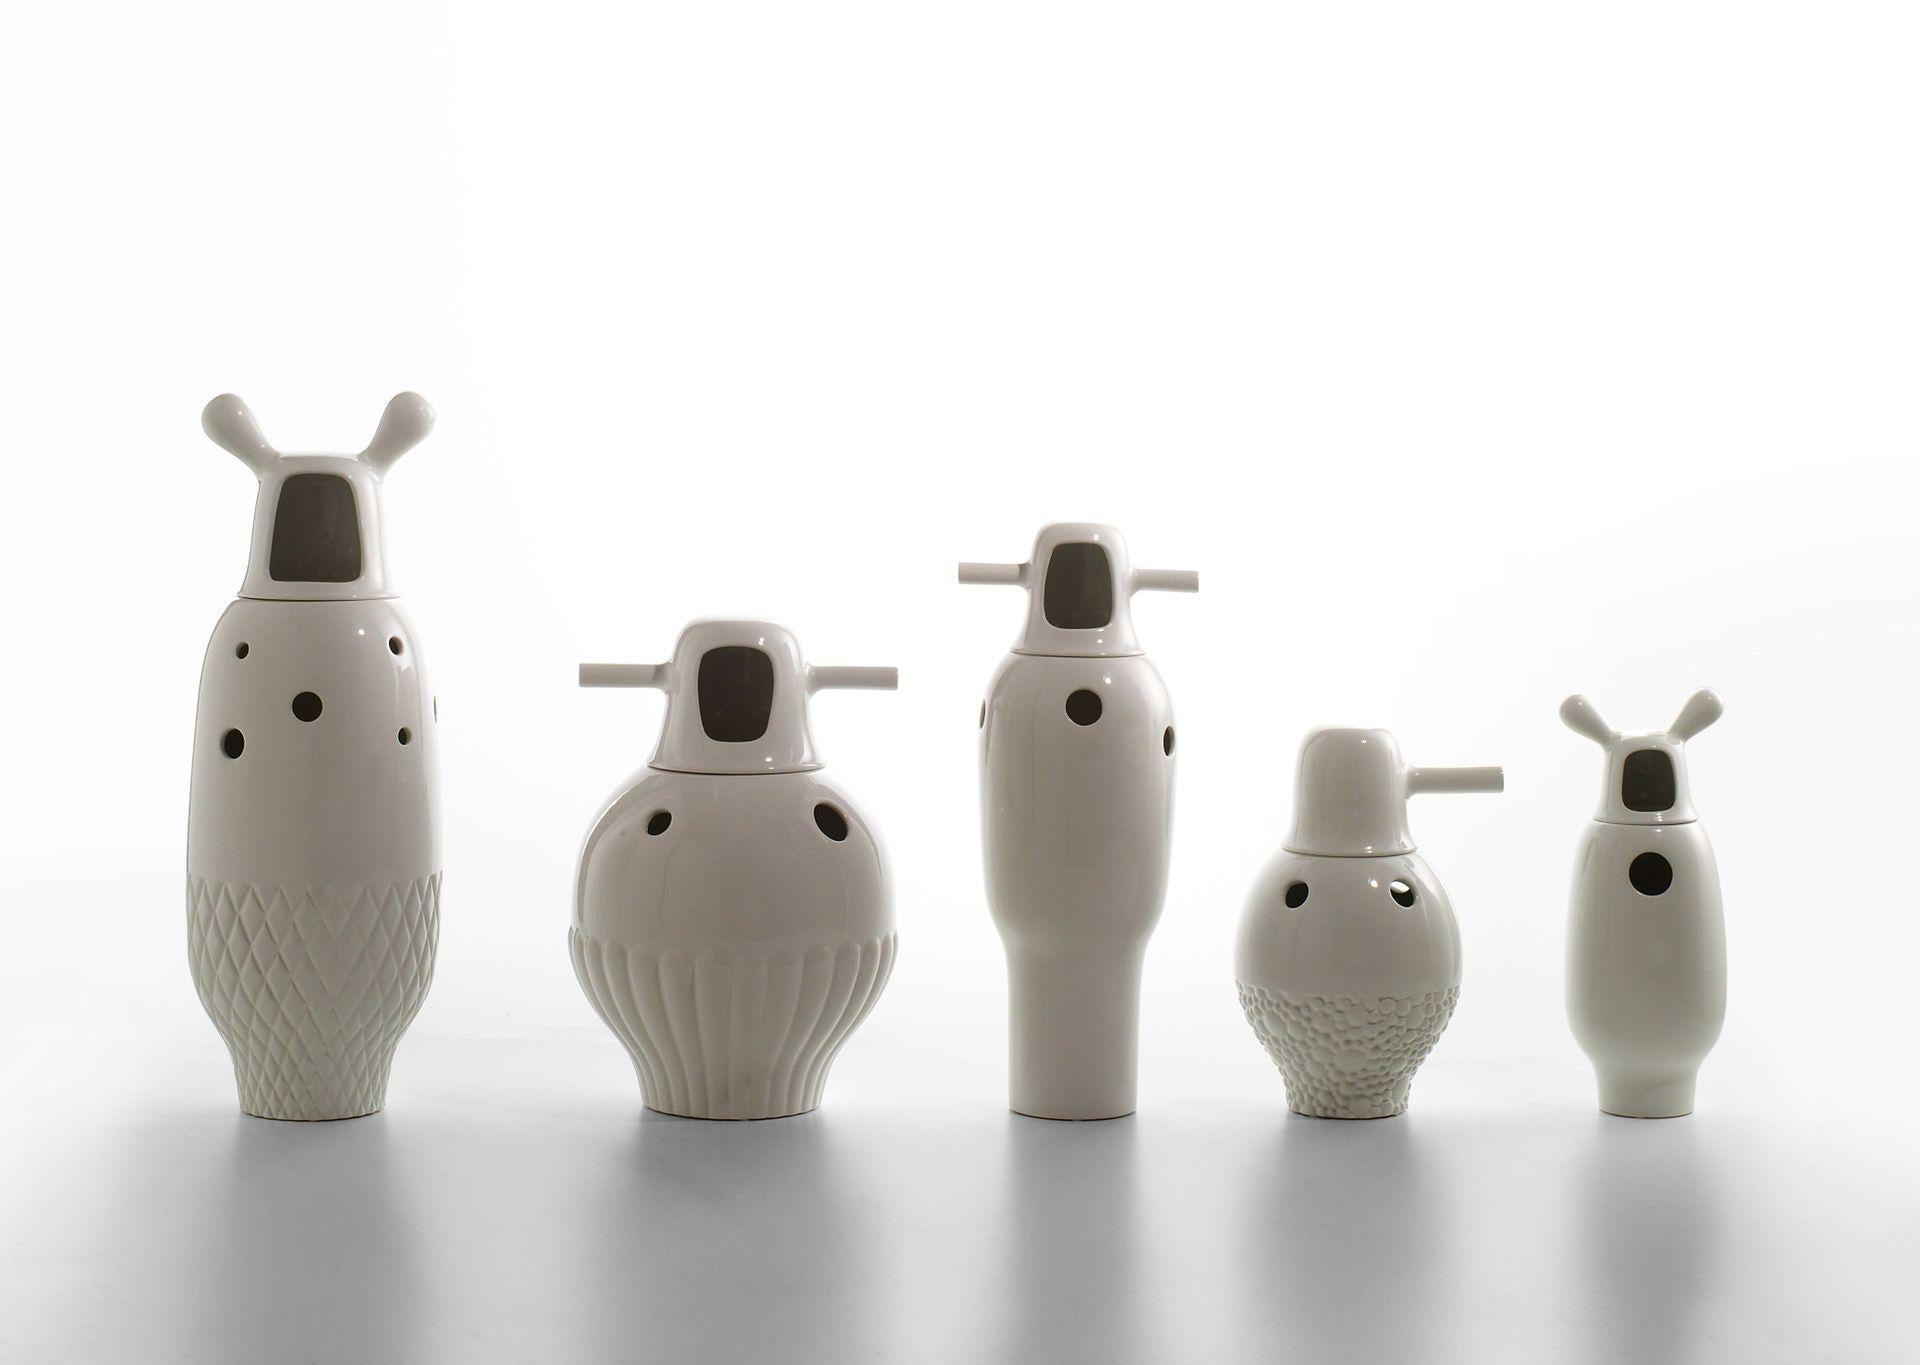 Set of showtime vases by Jaime Hayon 
Dimensions: D 19 x H 33, D 31 x H 34, D 27 x H 47, D 21 x H 48, D 23 x 59 cm
Materials: Made in two pieces in enameled stoneware porcelain; monocolour (interior and external in white) or bicolor (interior in